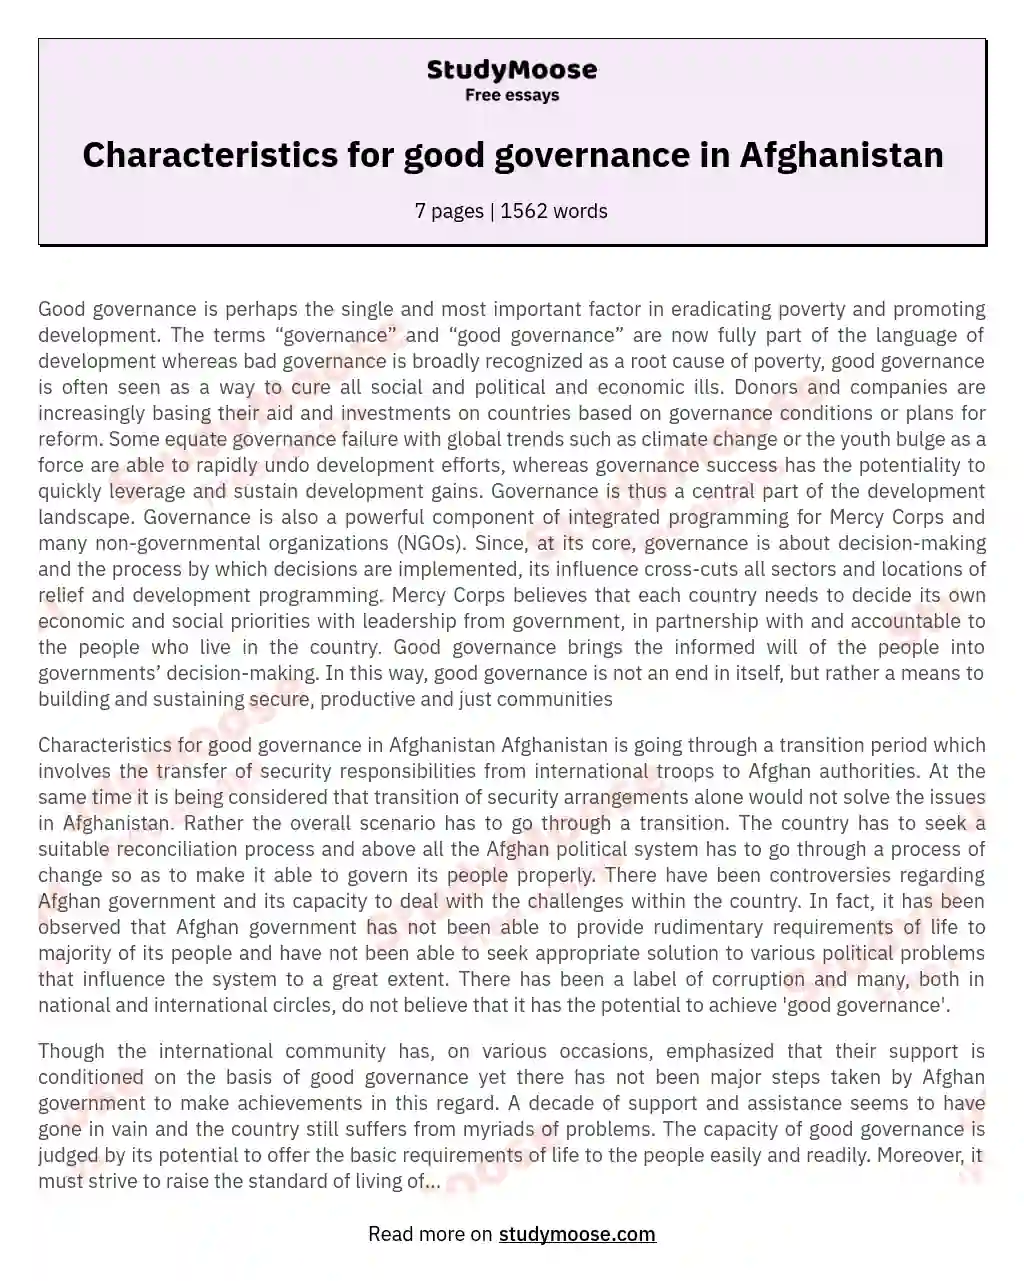 Characteristics for good governance in Afghanistan